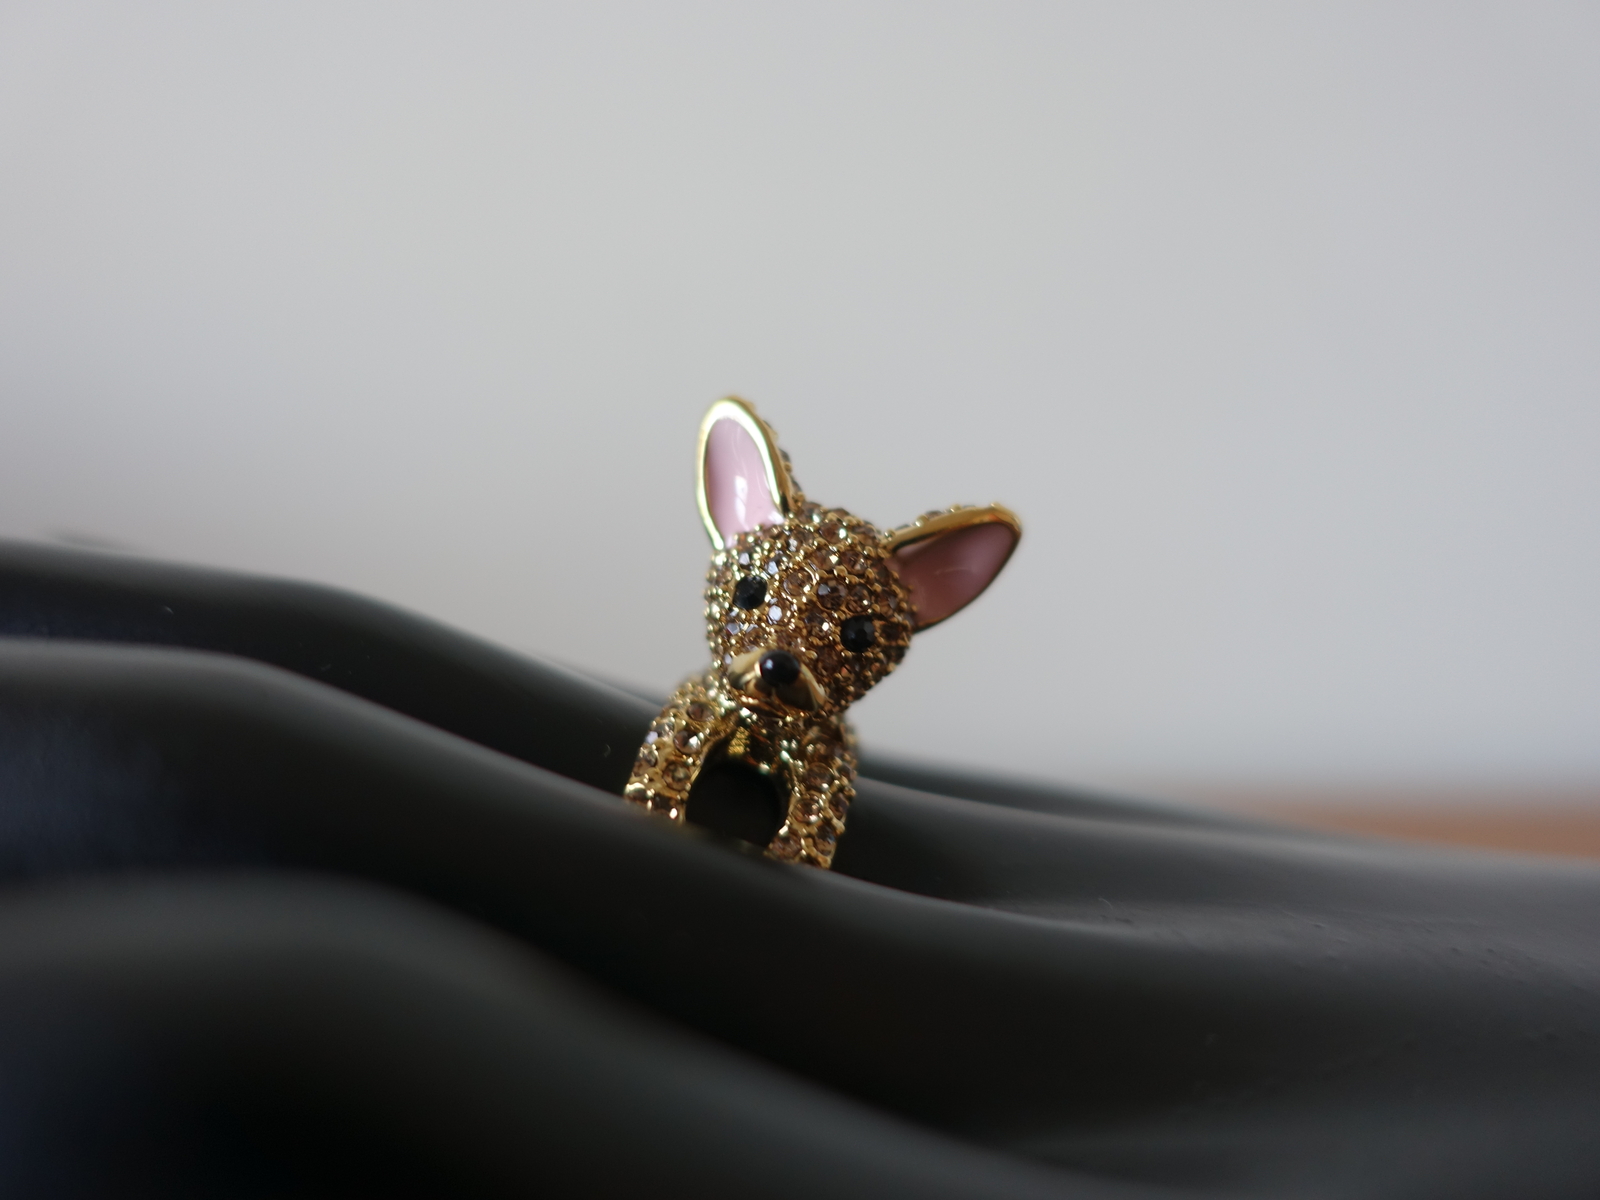 Primary image for KATE SPADE NEW YORK HAUTE STUFF CHIHUAHUA DOG RING, SIZE 7. NEW